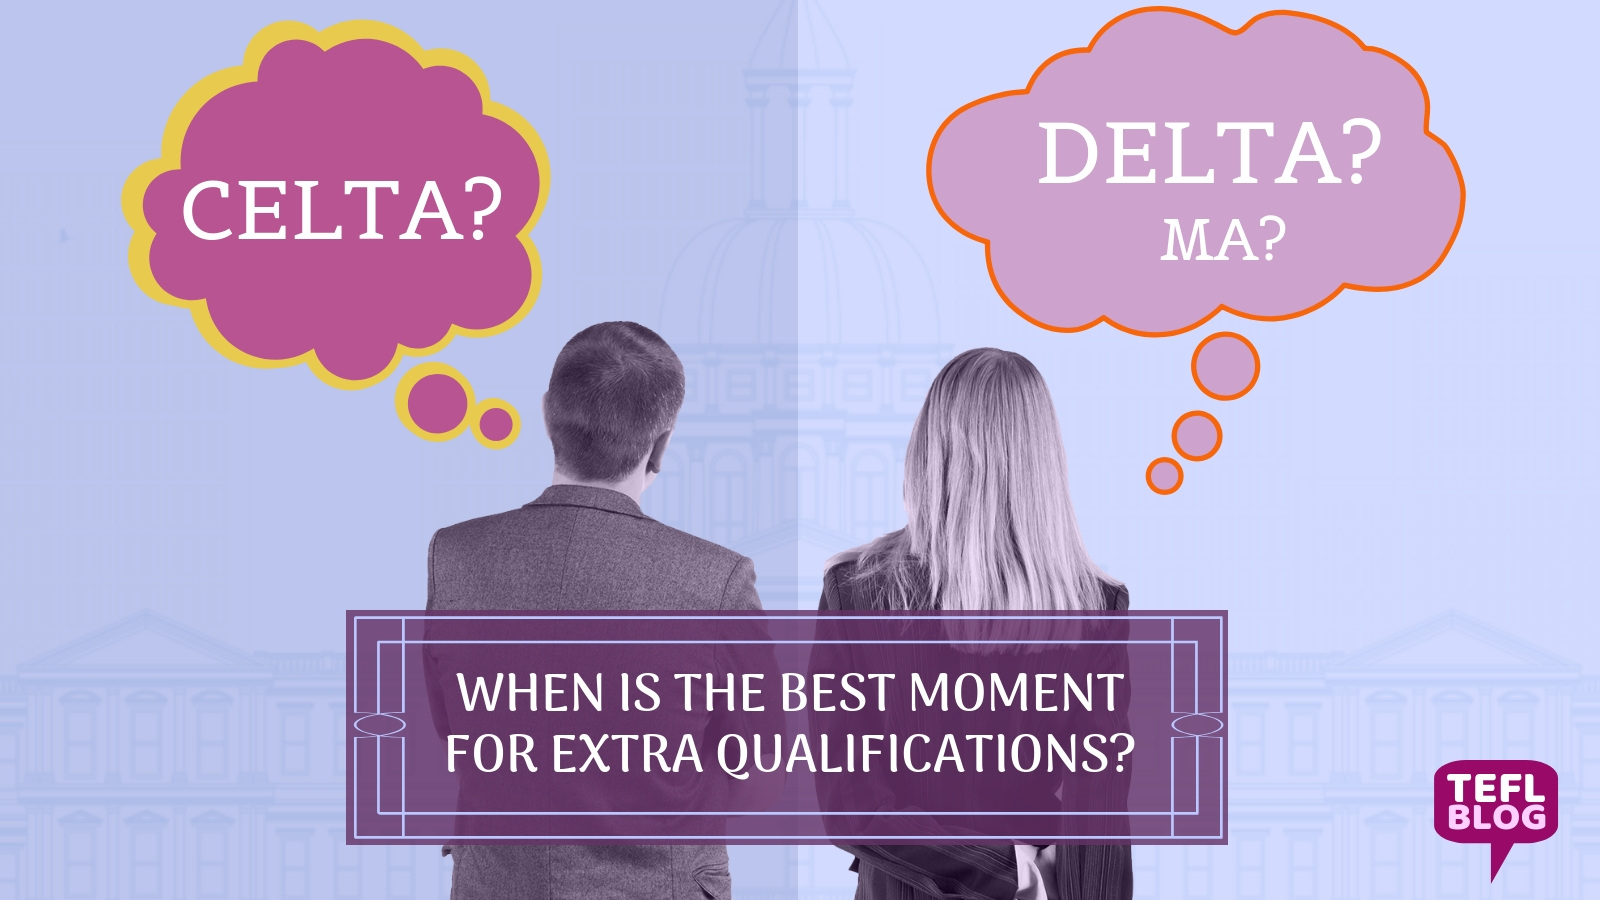 CELTA, DELTA, MA?  When is the best career moment for extra qualifications?